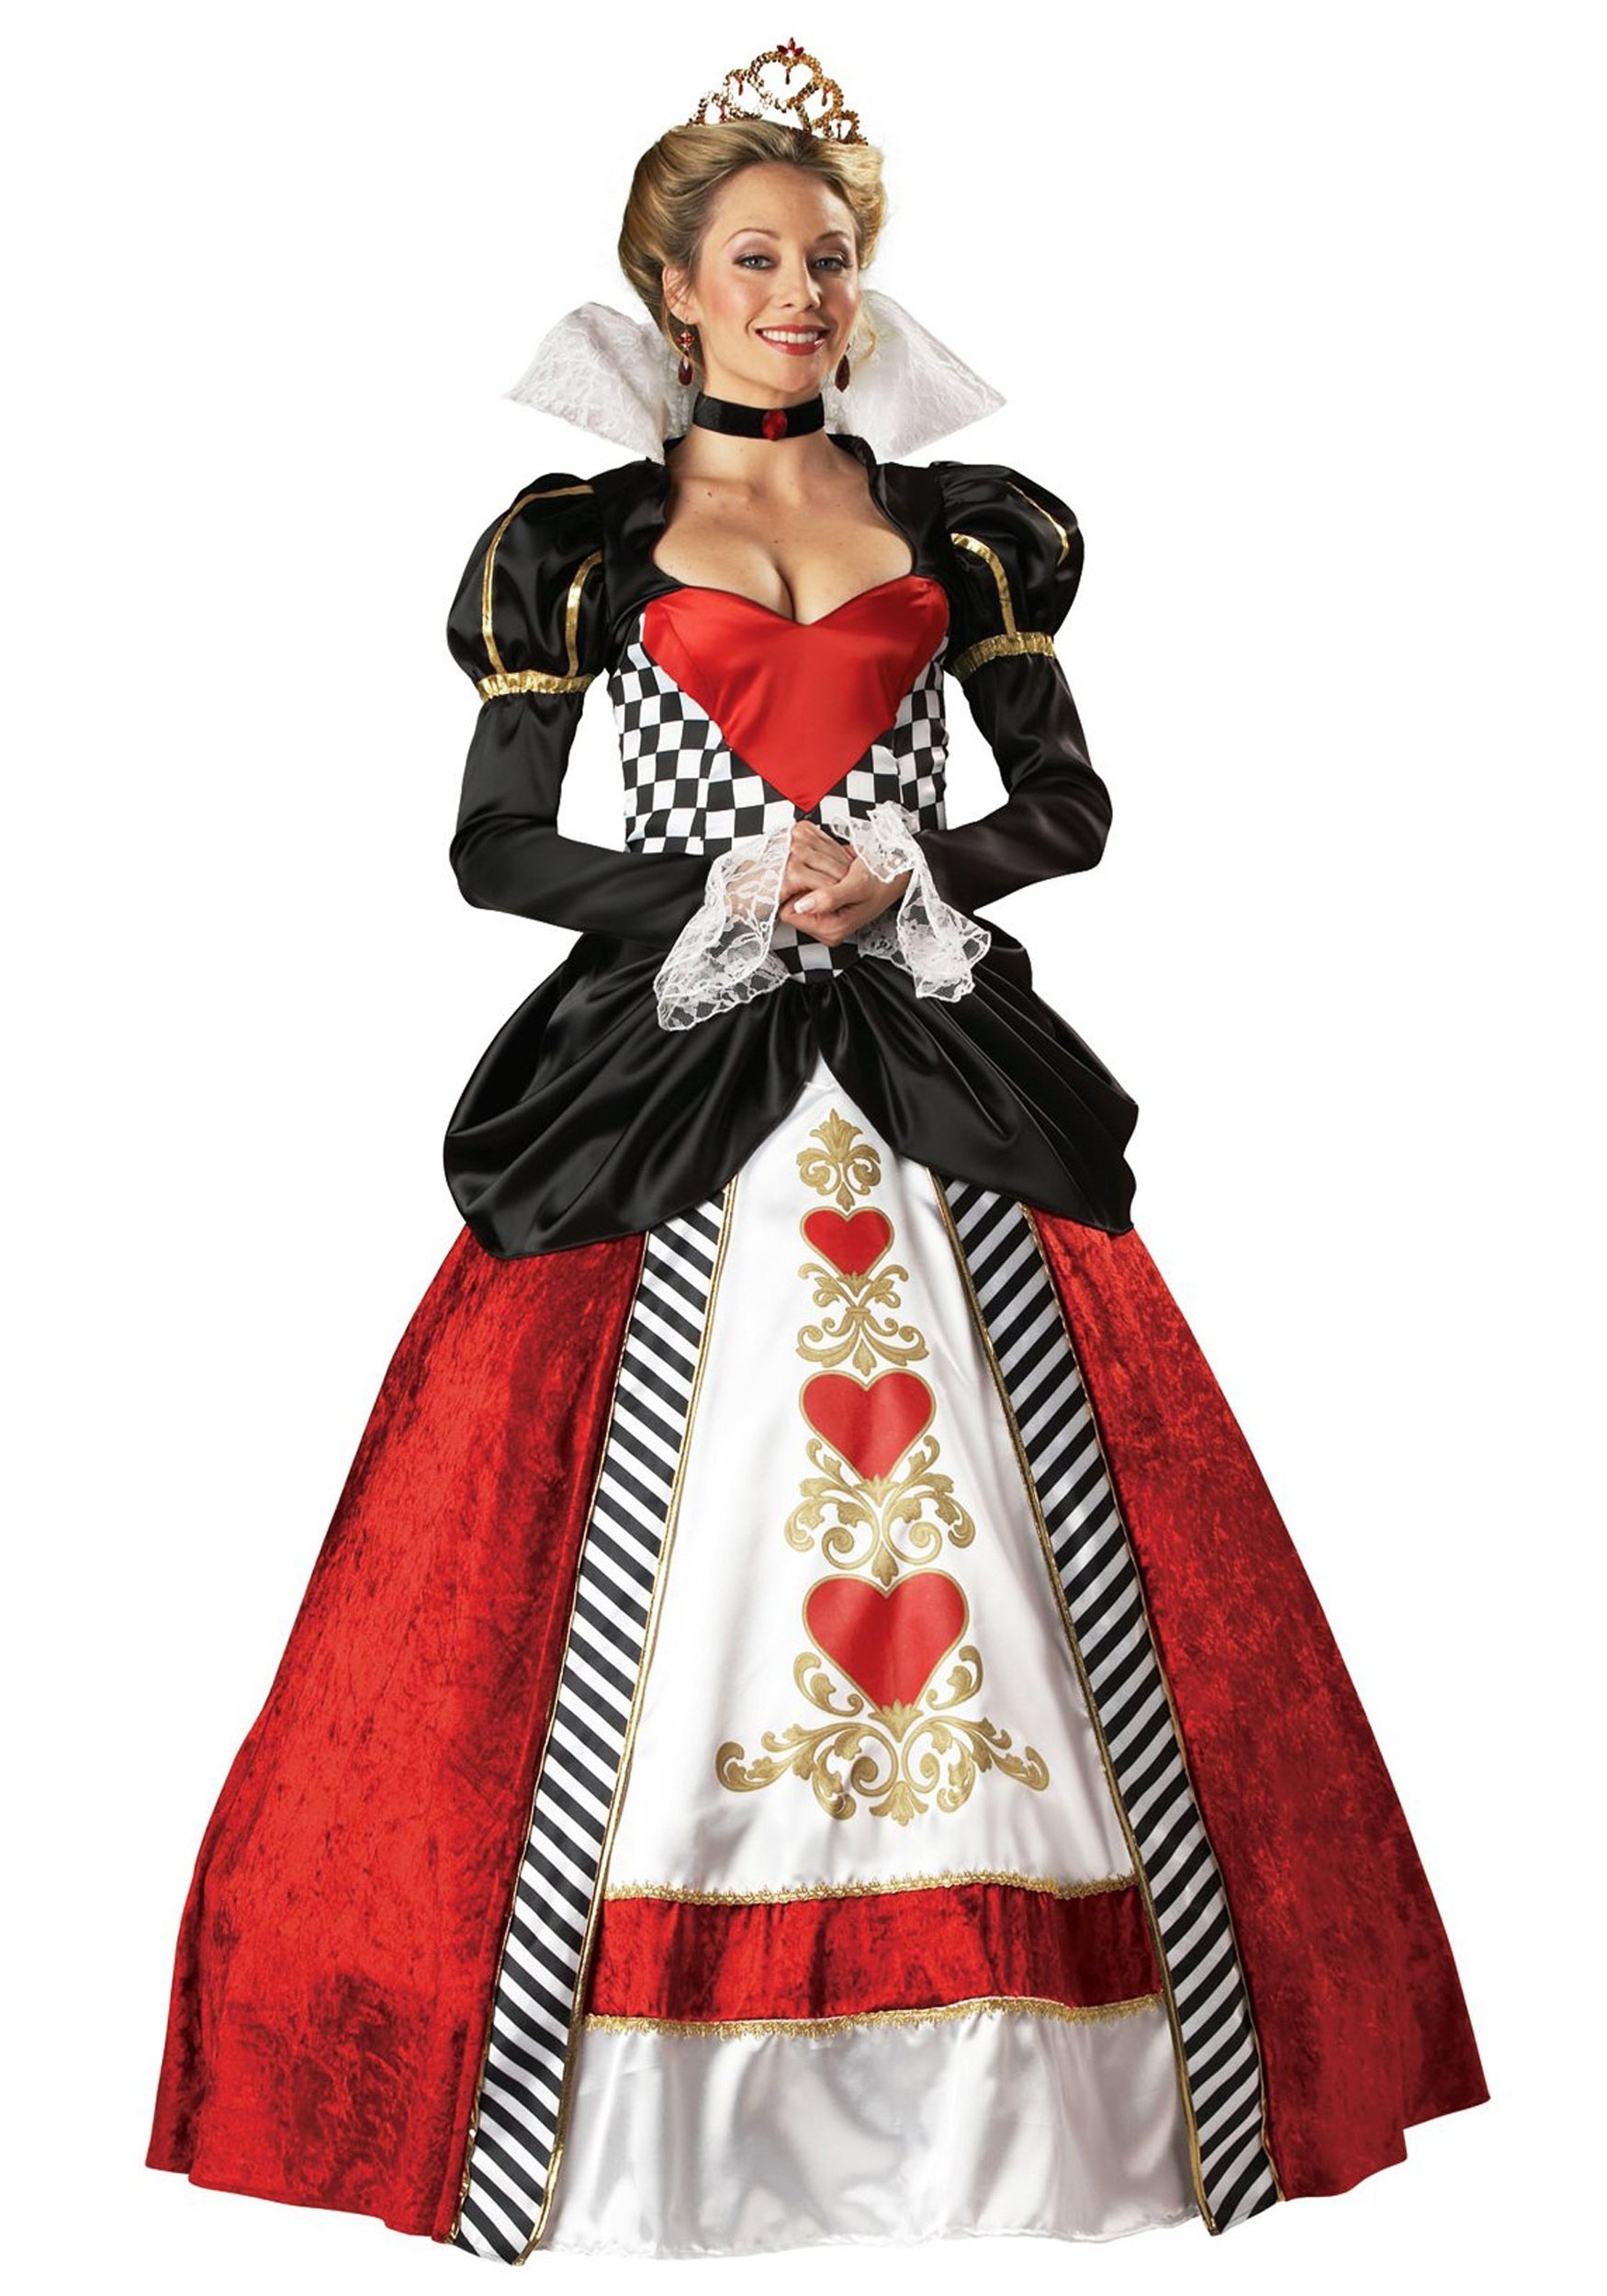 Queen of Hearts Costume - The Fancy Dress Costume Shop Europe